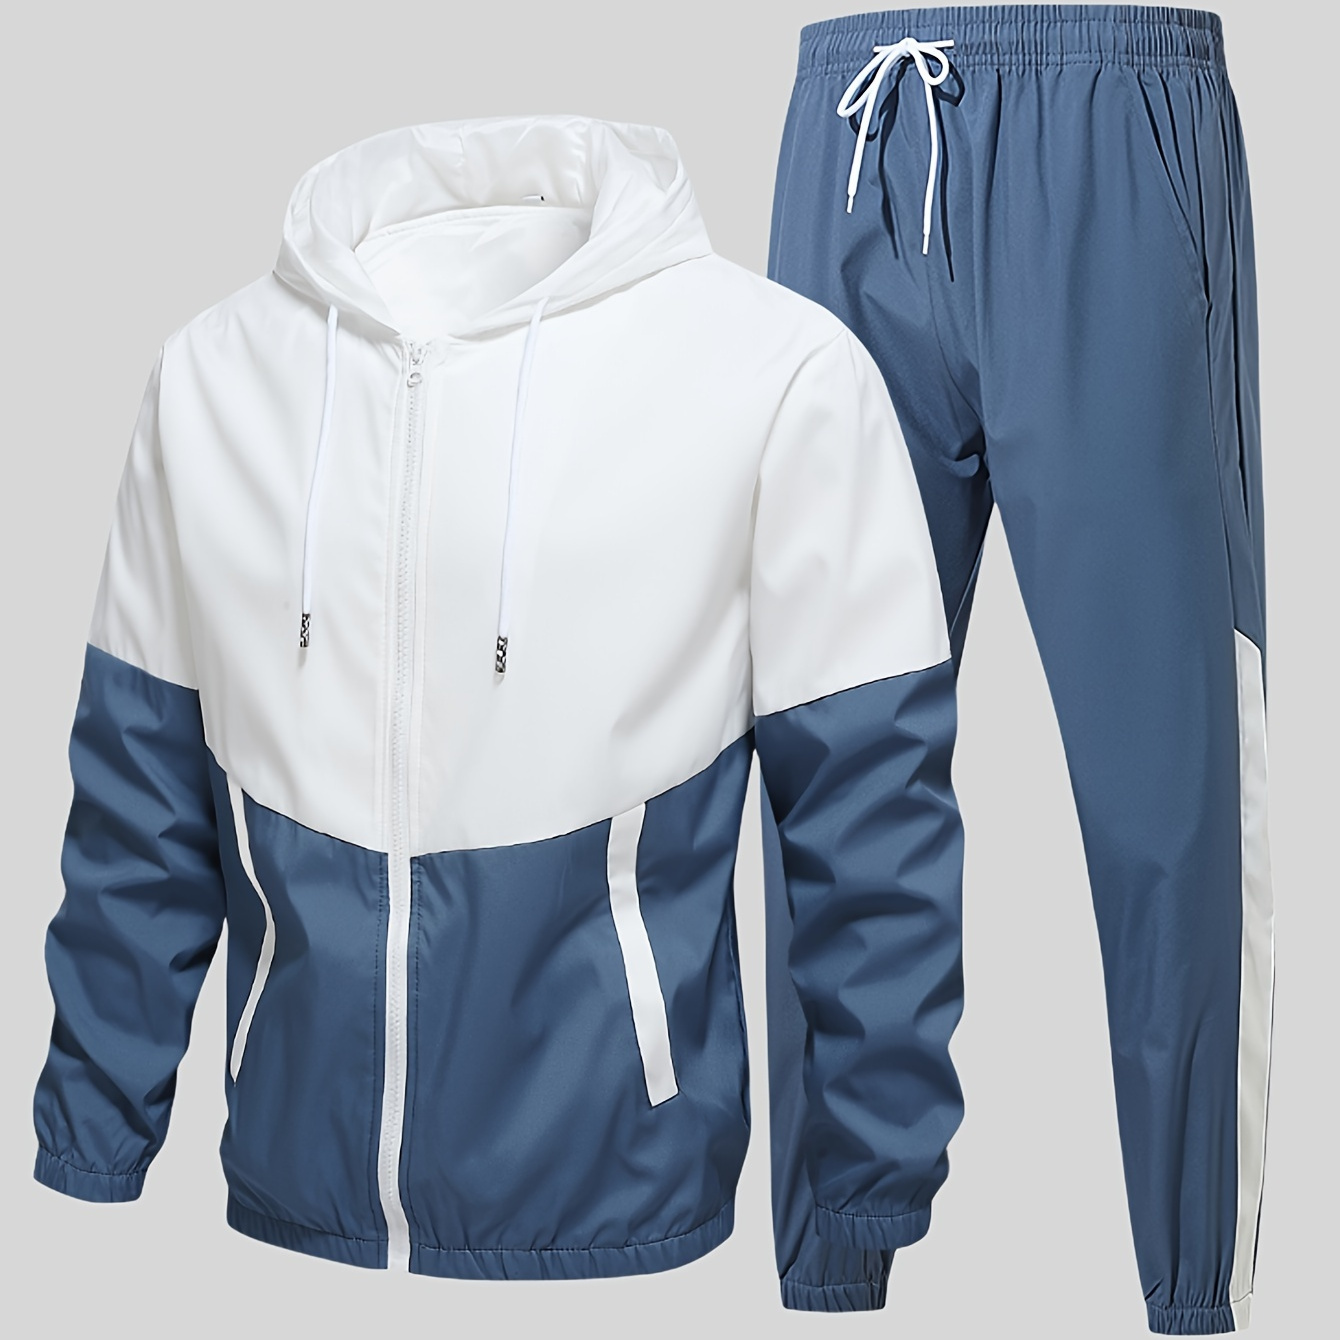 

Men's Casual Sports Set, Spring/autumn Hooded Jacket And Pants, 2-piece Stylish Athletic Suit, Youth Fashion Trend, Color Block Design